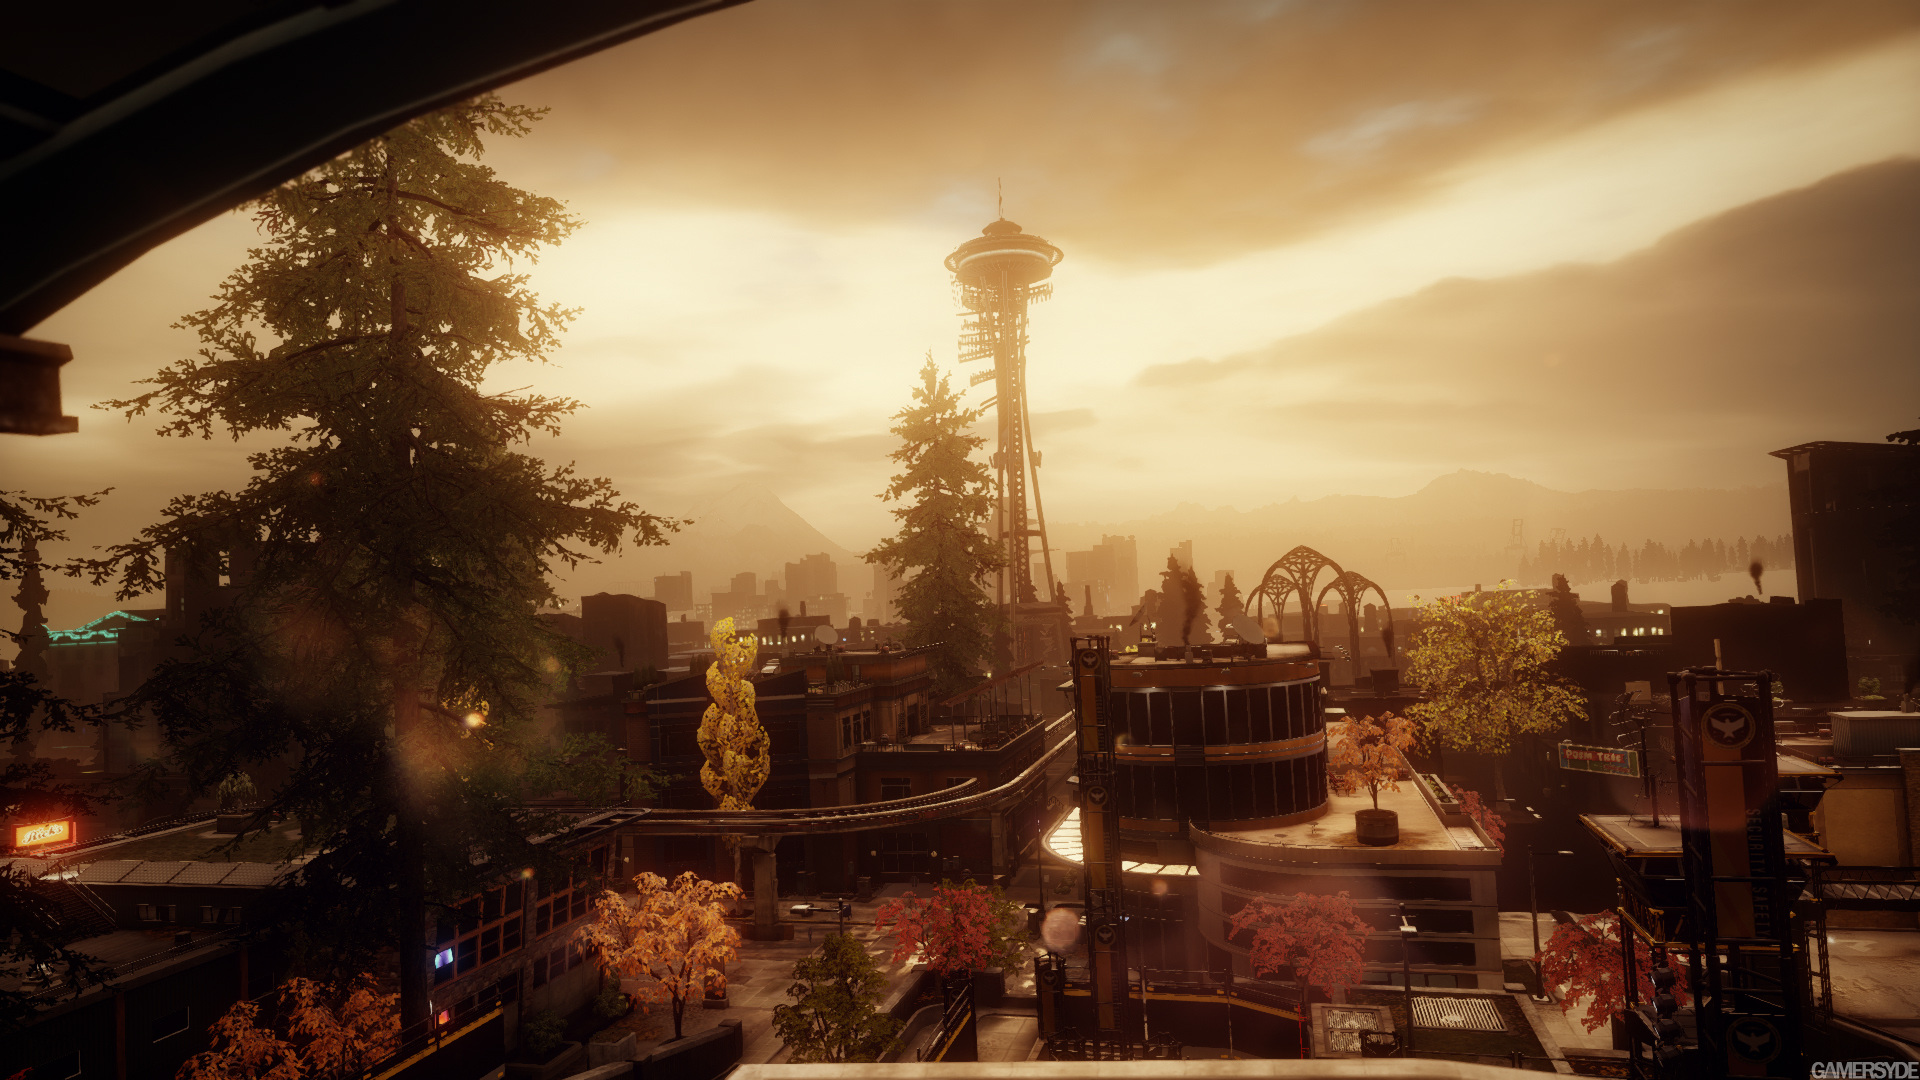 image_infamous_second_son-22604-2661_0001.jpg